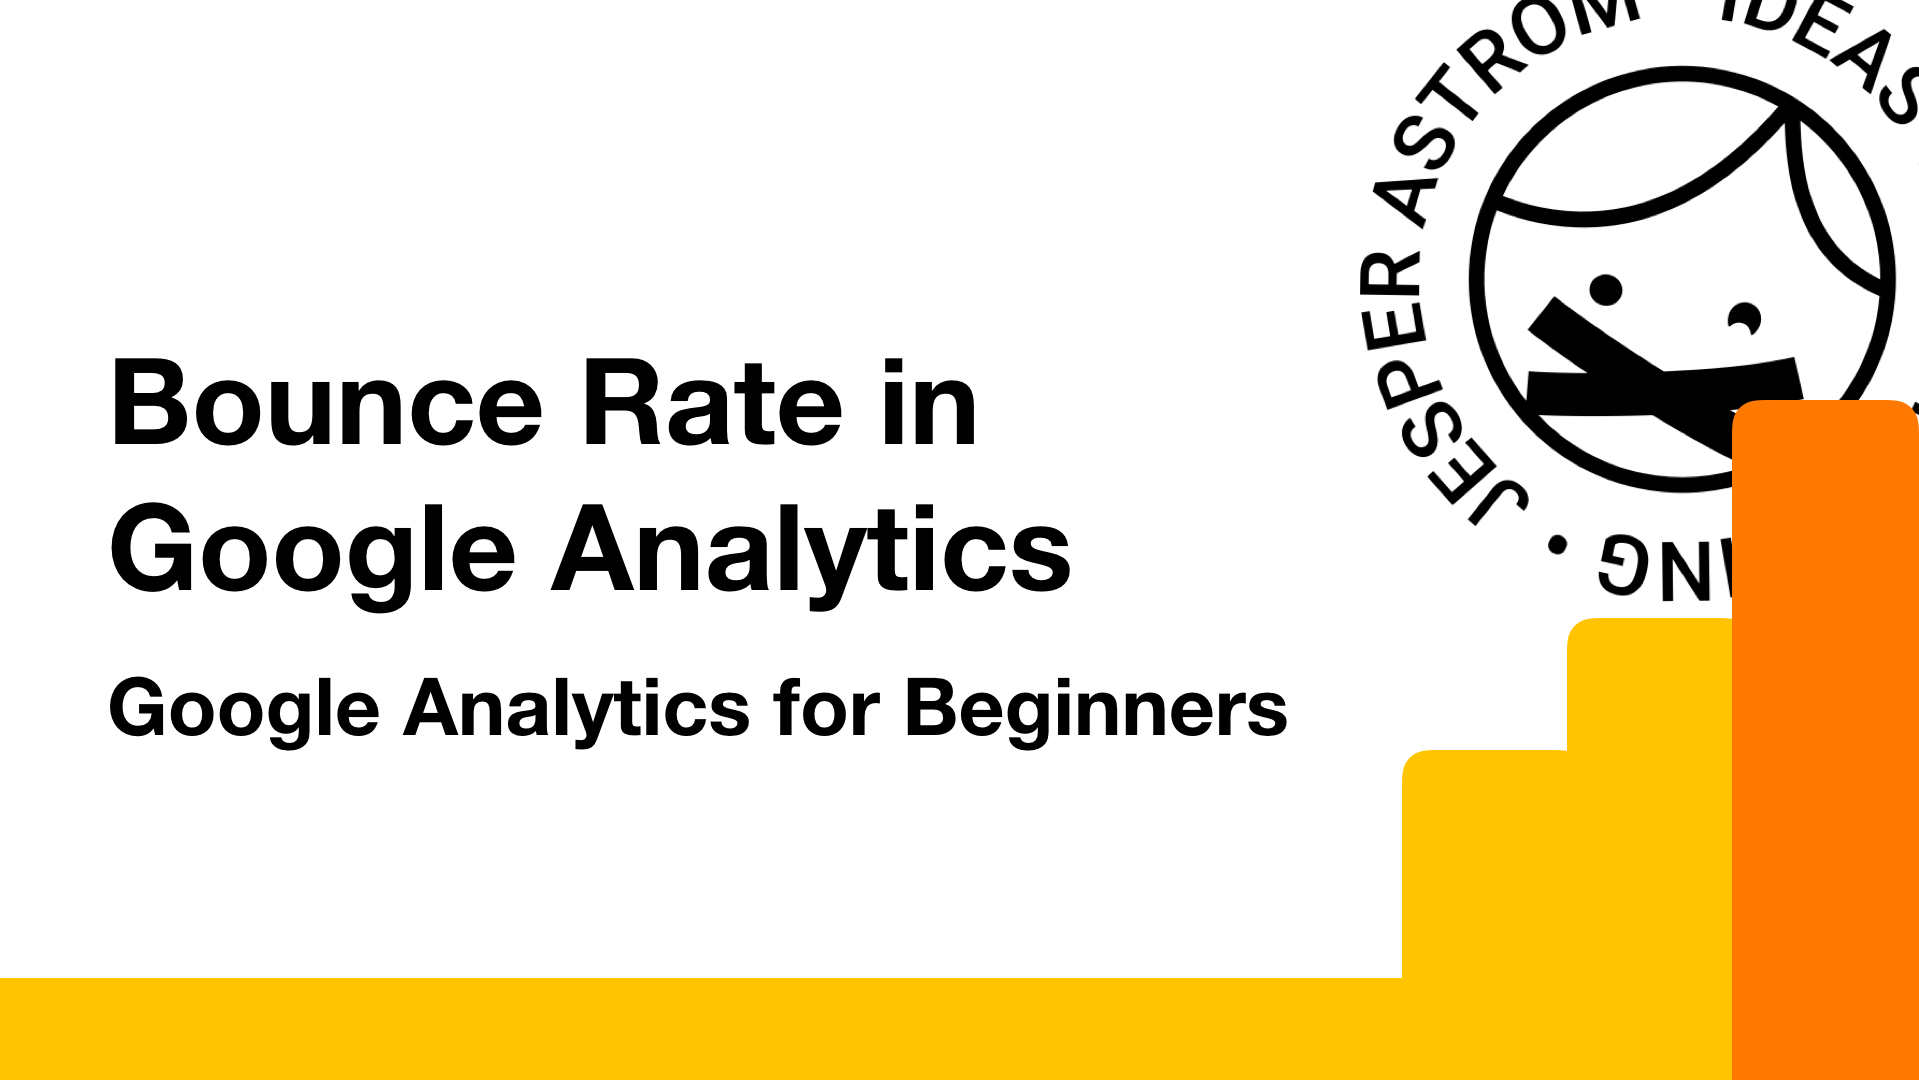 Cover image of article about Bounce Rate in Google Analytics